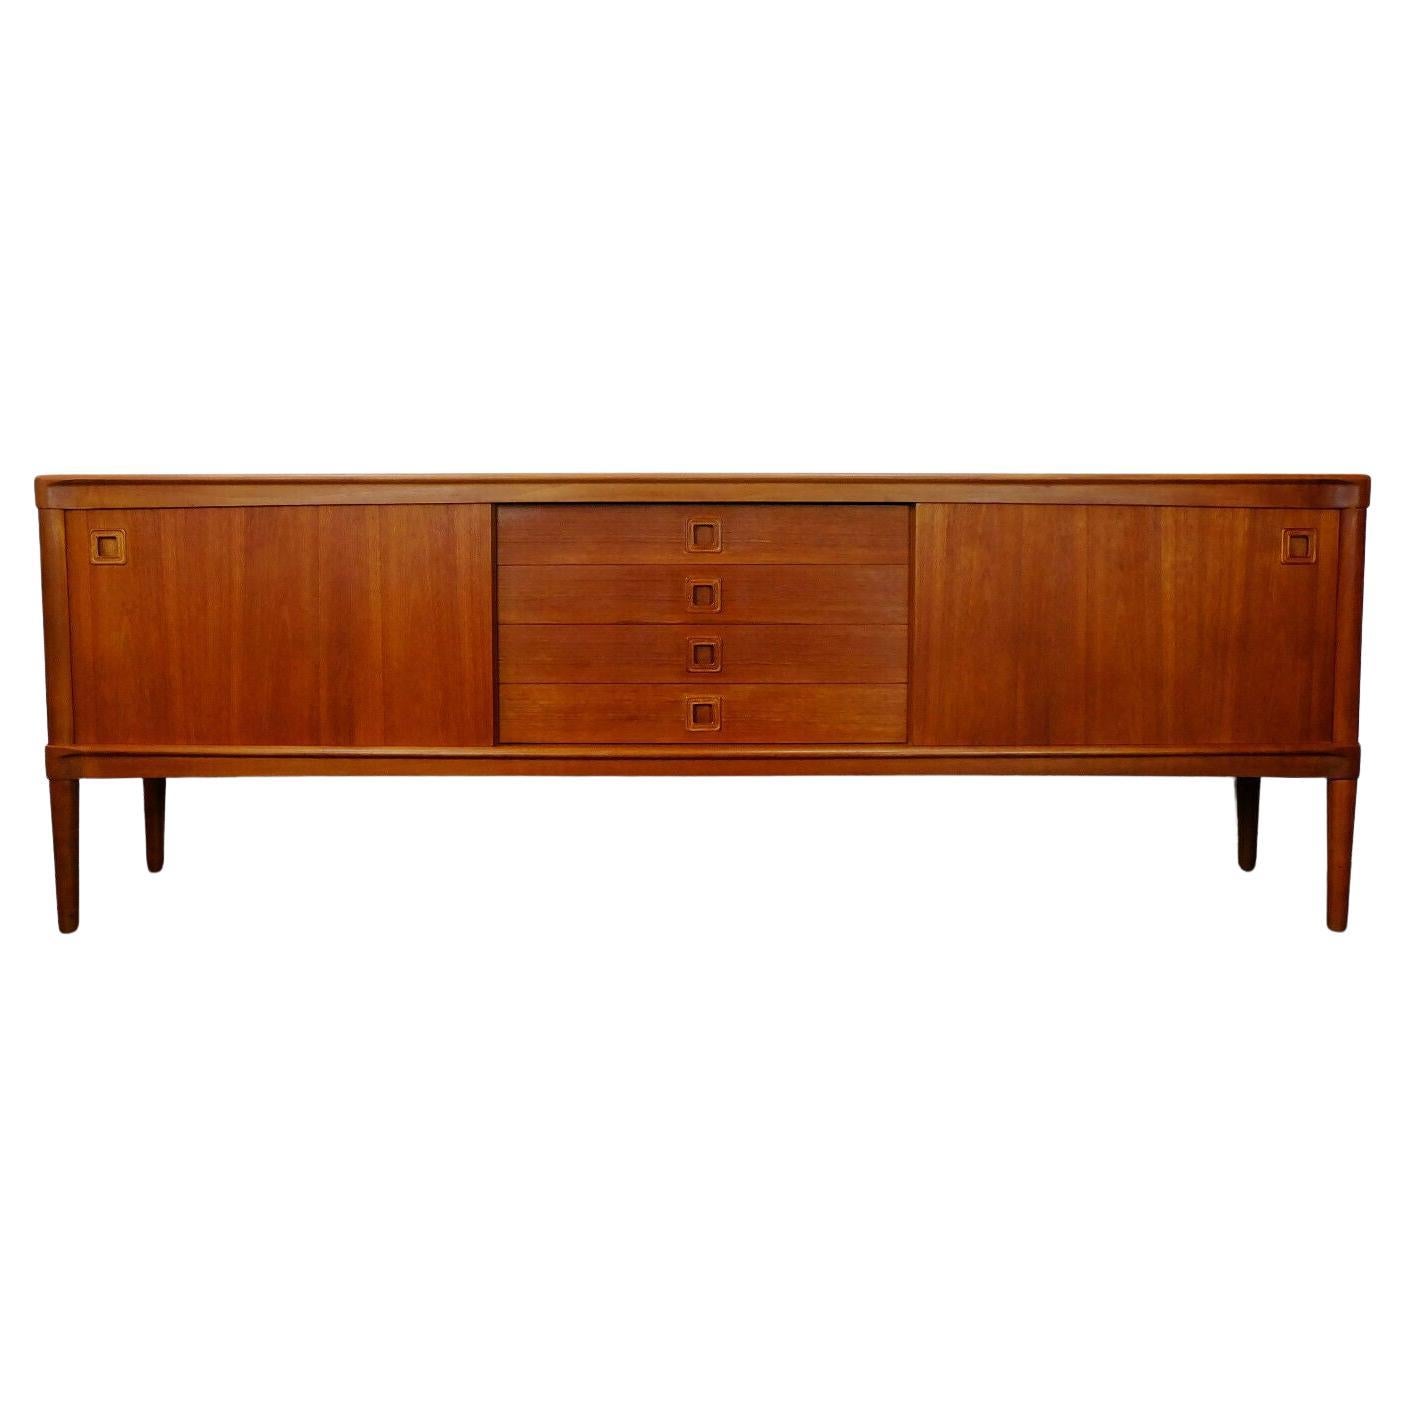 Danish Modern Rosewood Sideboard by H.W. Klein for Bramin, 1960s at 1stDibs